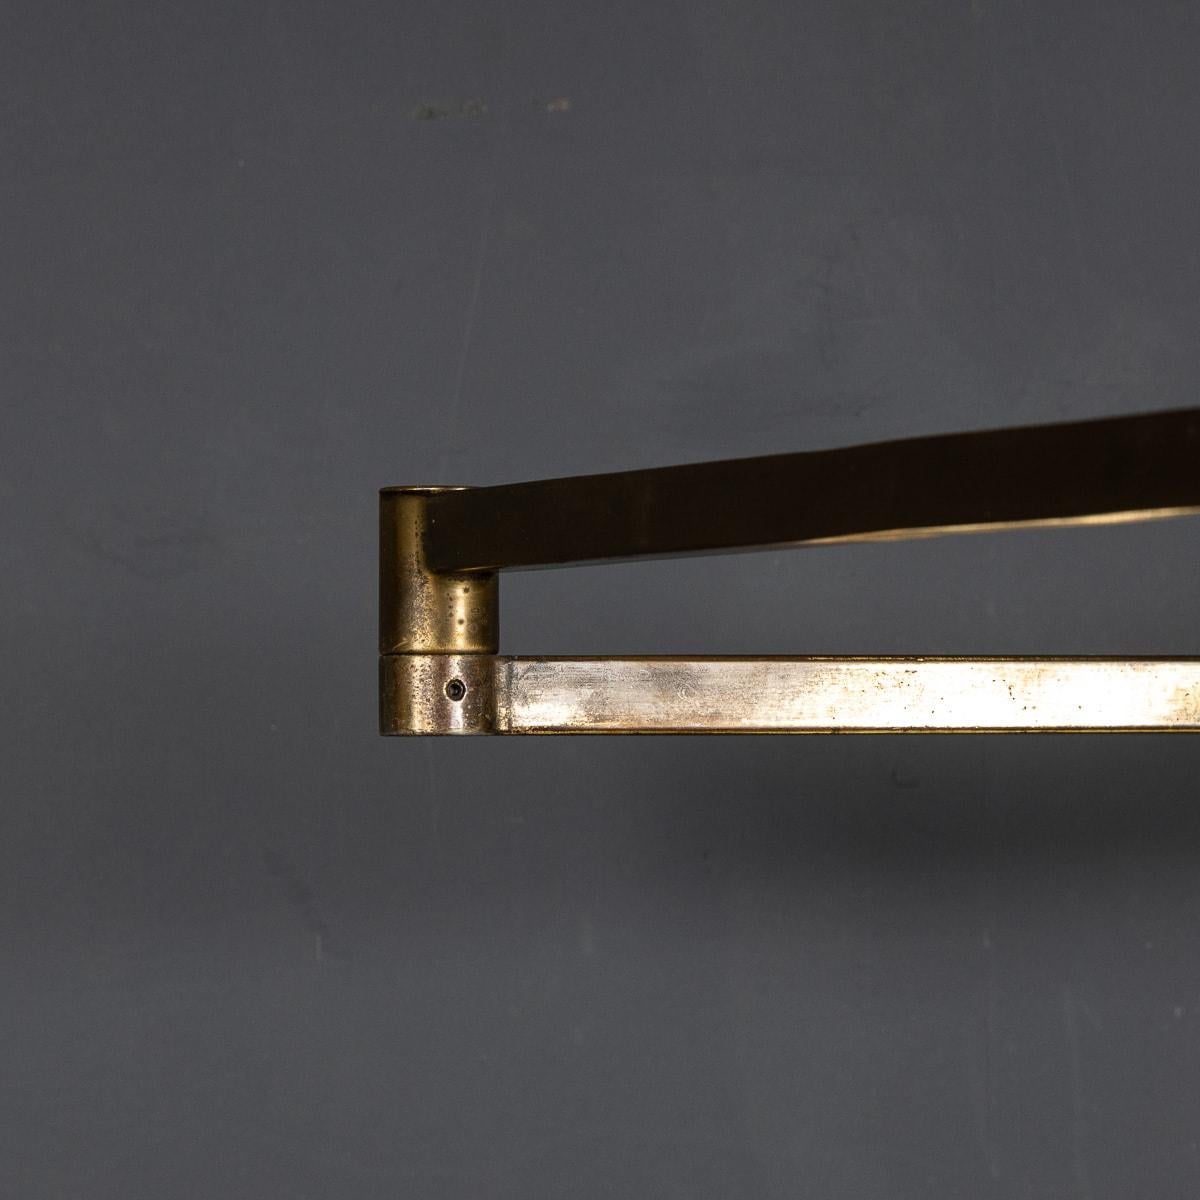 Pair of Italian Brass Articulated Wall Lights by Albini & Helg, c.1960 For Sale 6